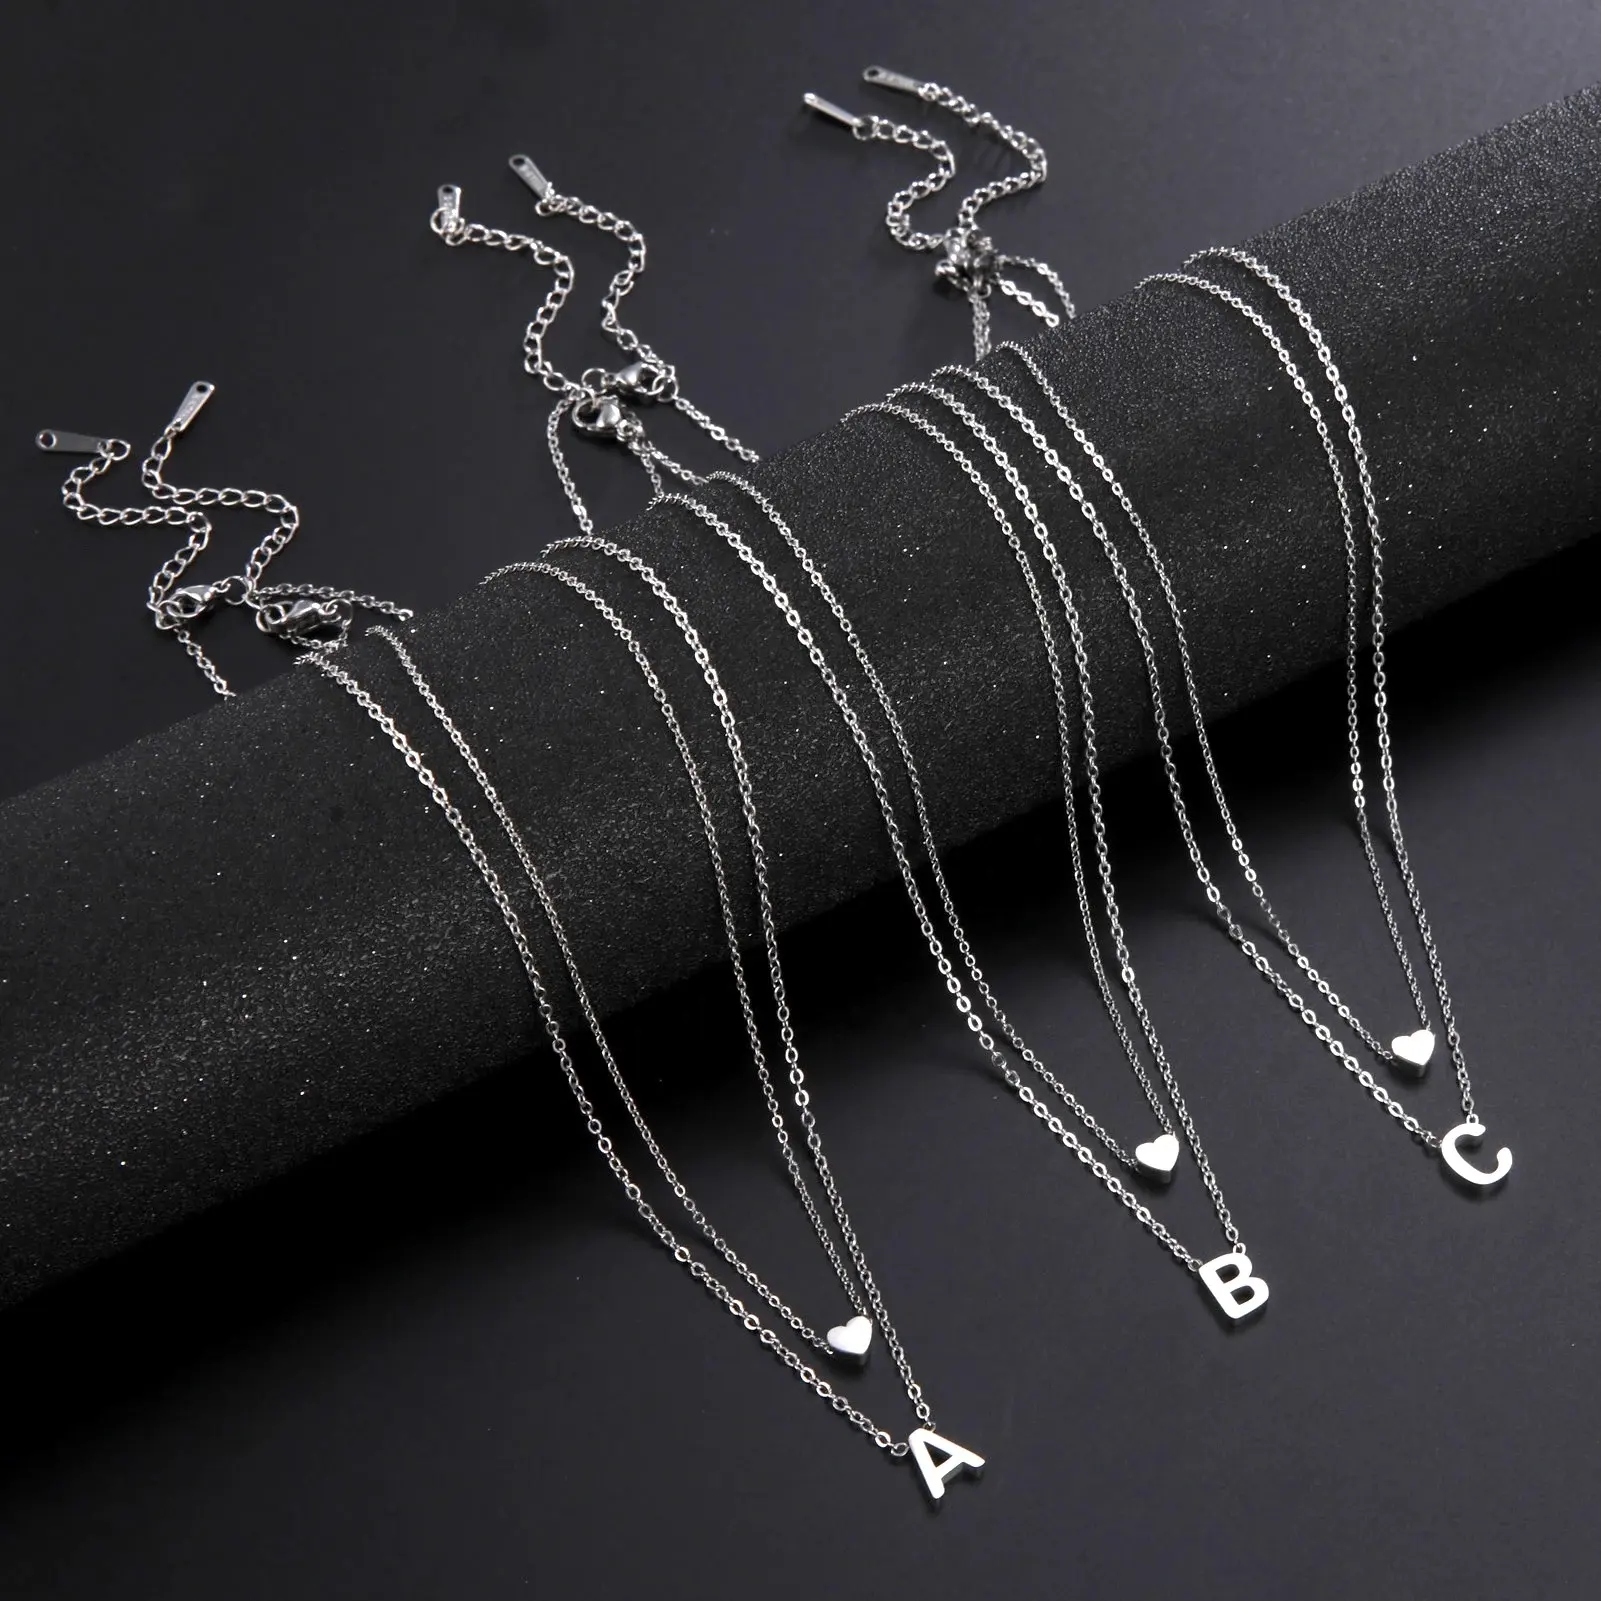 2pcs 1 set Initial Letter Heart Pendant Necklaces for Women A-Z 26 Alphabet Stainless Steel Neck Chains Jewelry Birthday Gift